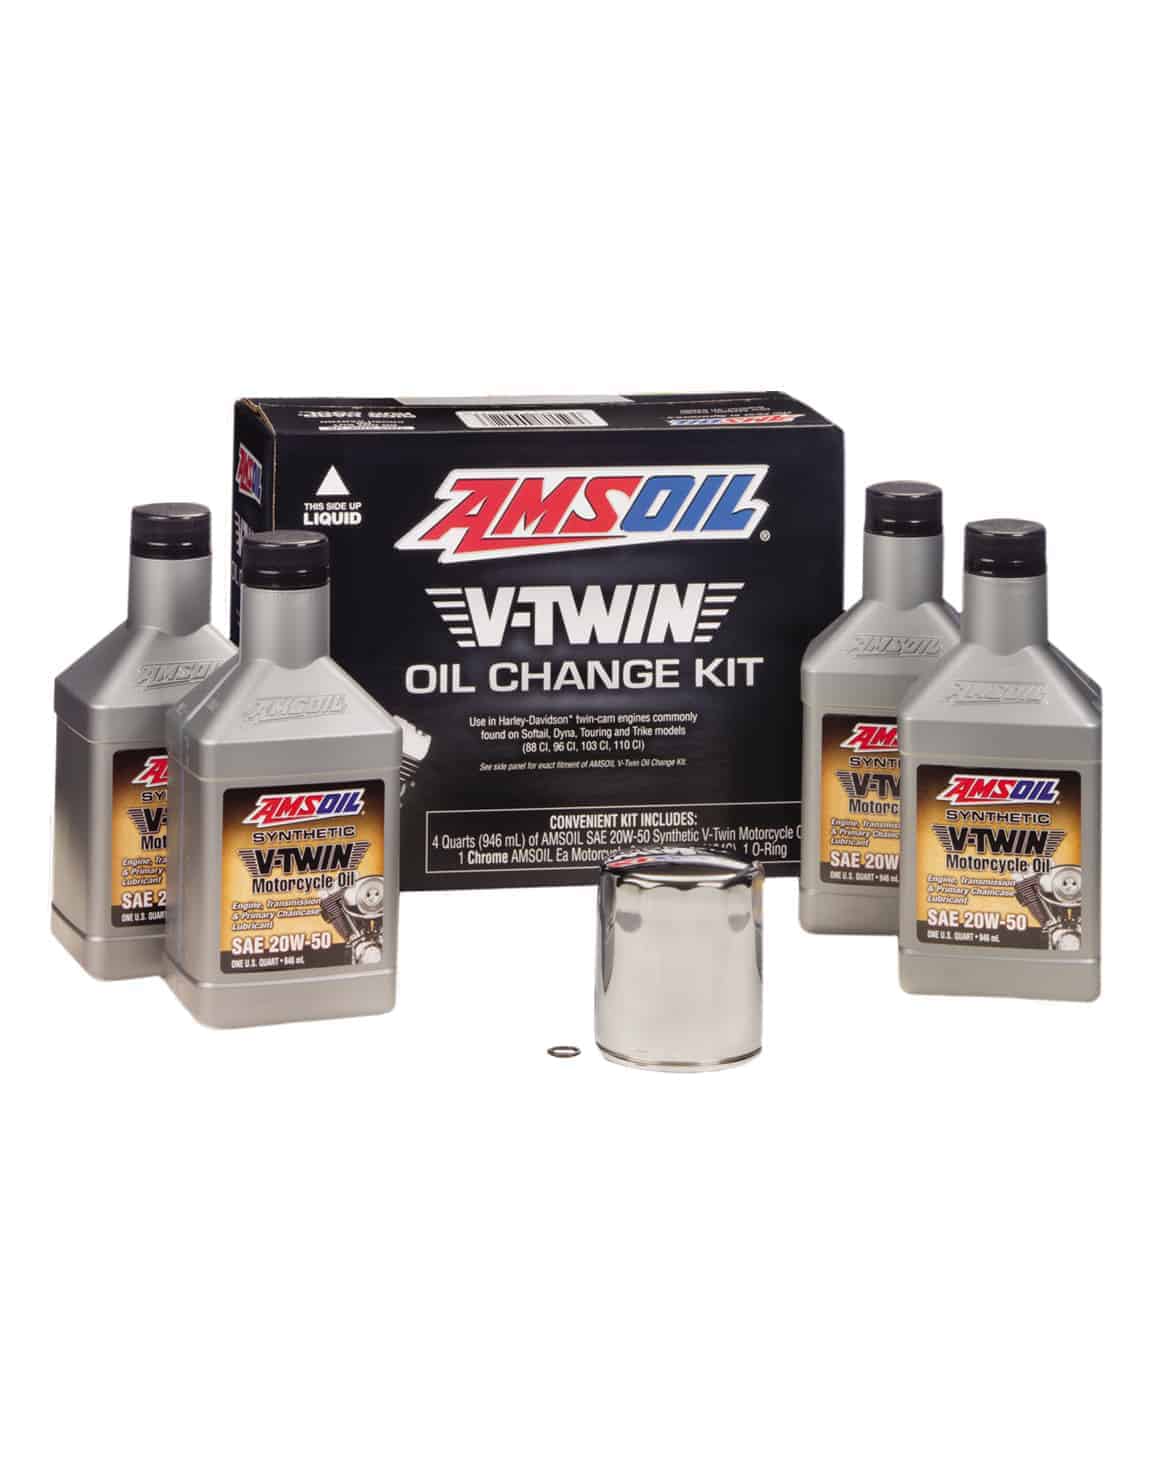  Amsoil SAE 20W-50 Synthetic Motorcycle Oil (MCV